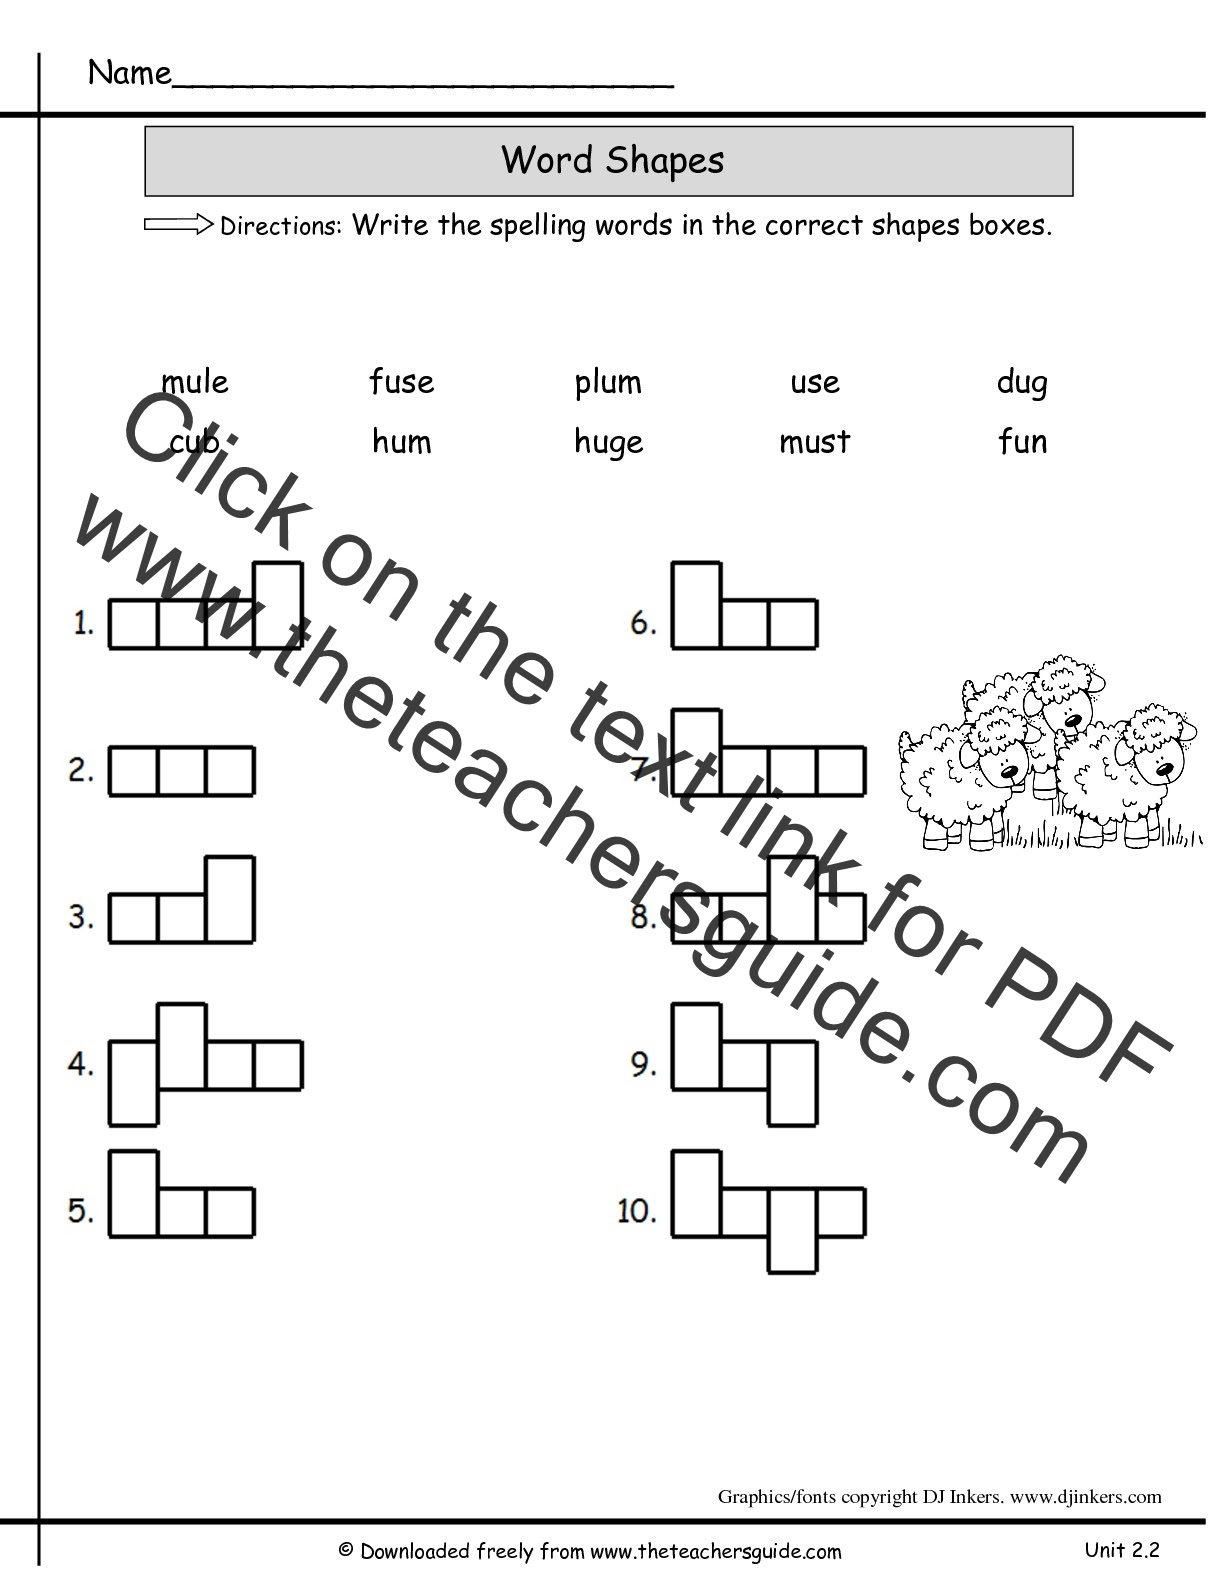 spelling-english-worksheets-for-class-2-2nd-grade-spelling-worksheets